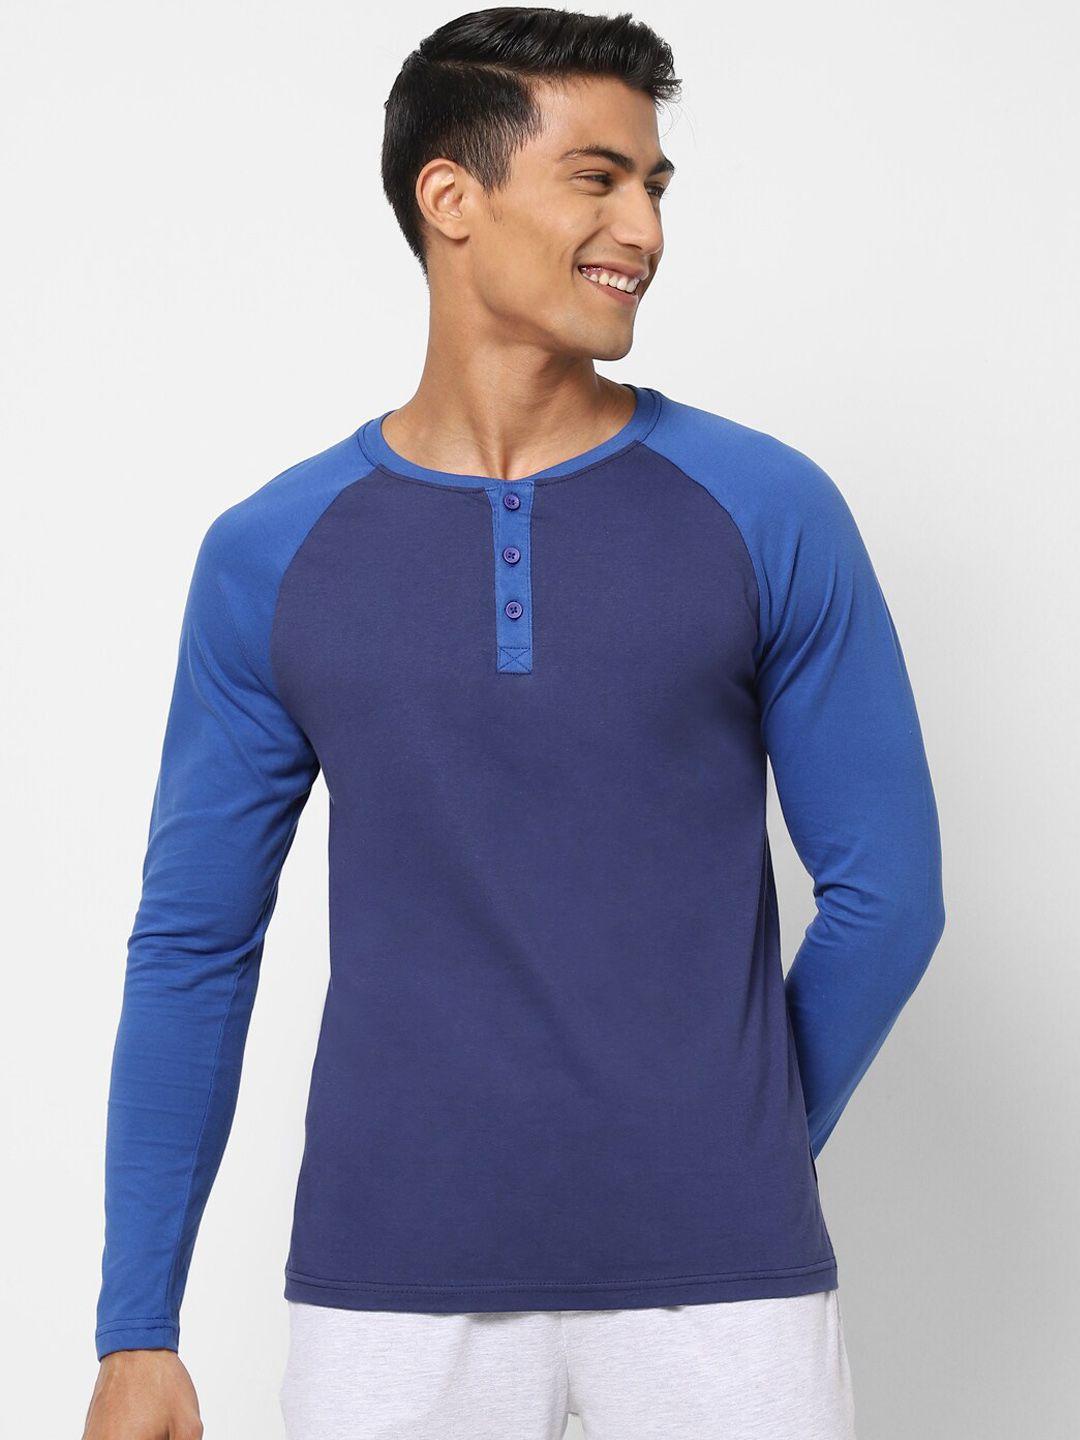 ajile-by-pantaloons-men-blue-solid-lounge-t-shirts